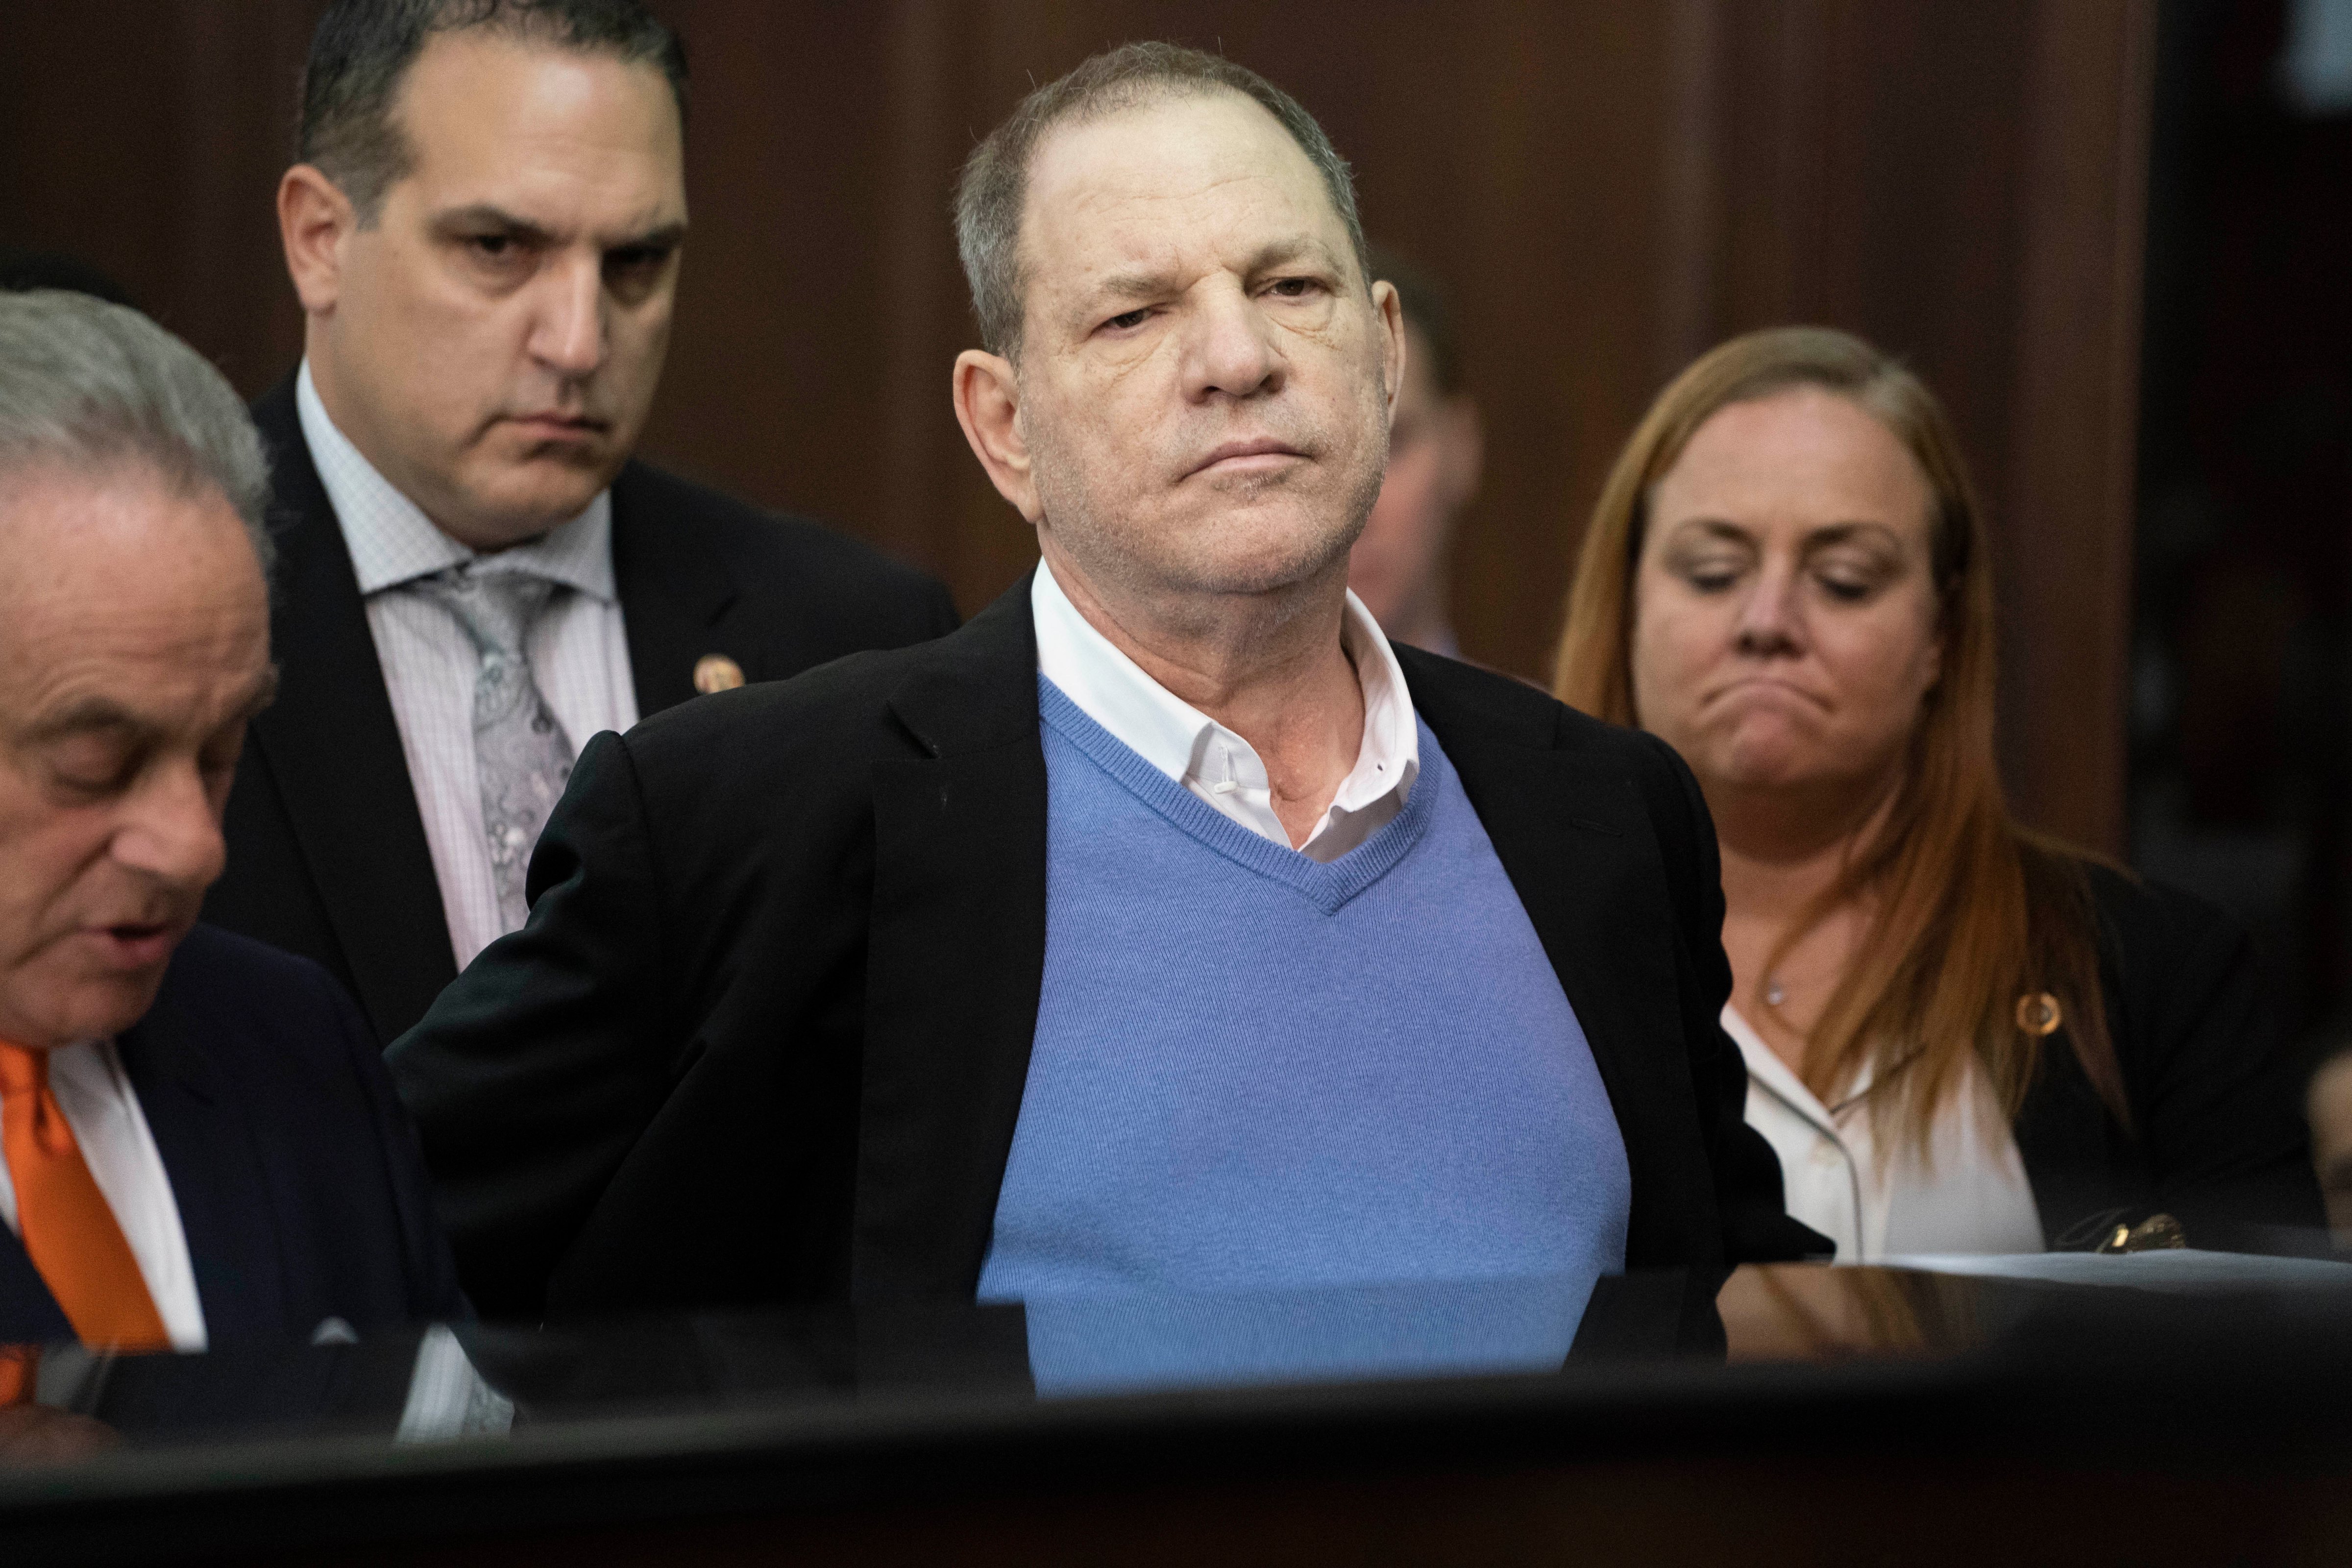 Harvey Weinstein along with his attorney Benjamin Brafman (L) appears at his arraignment in Manhattan Criminal Court on Friday, May 25, 2018. (Steven Hirsch—Pool/ Getty Images)